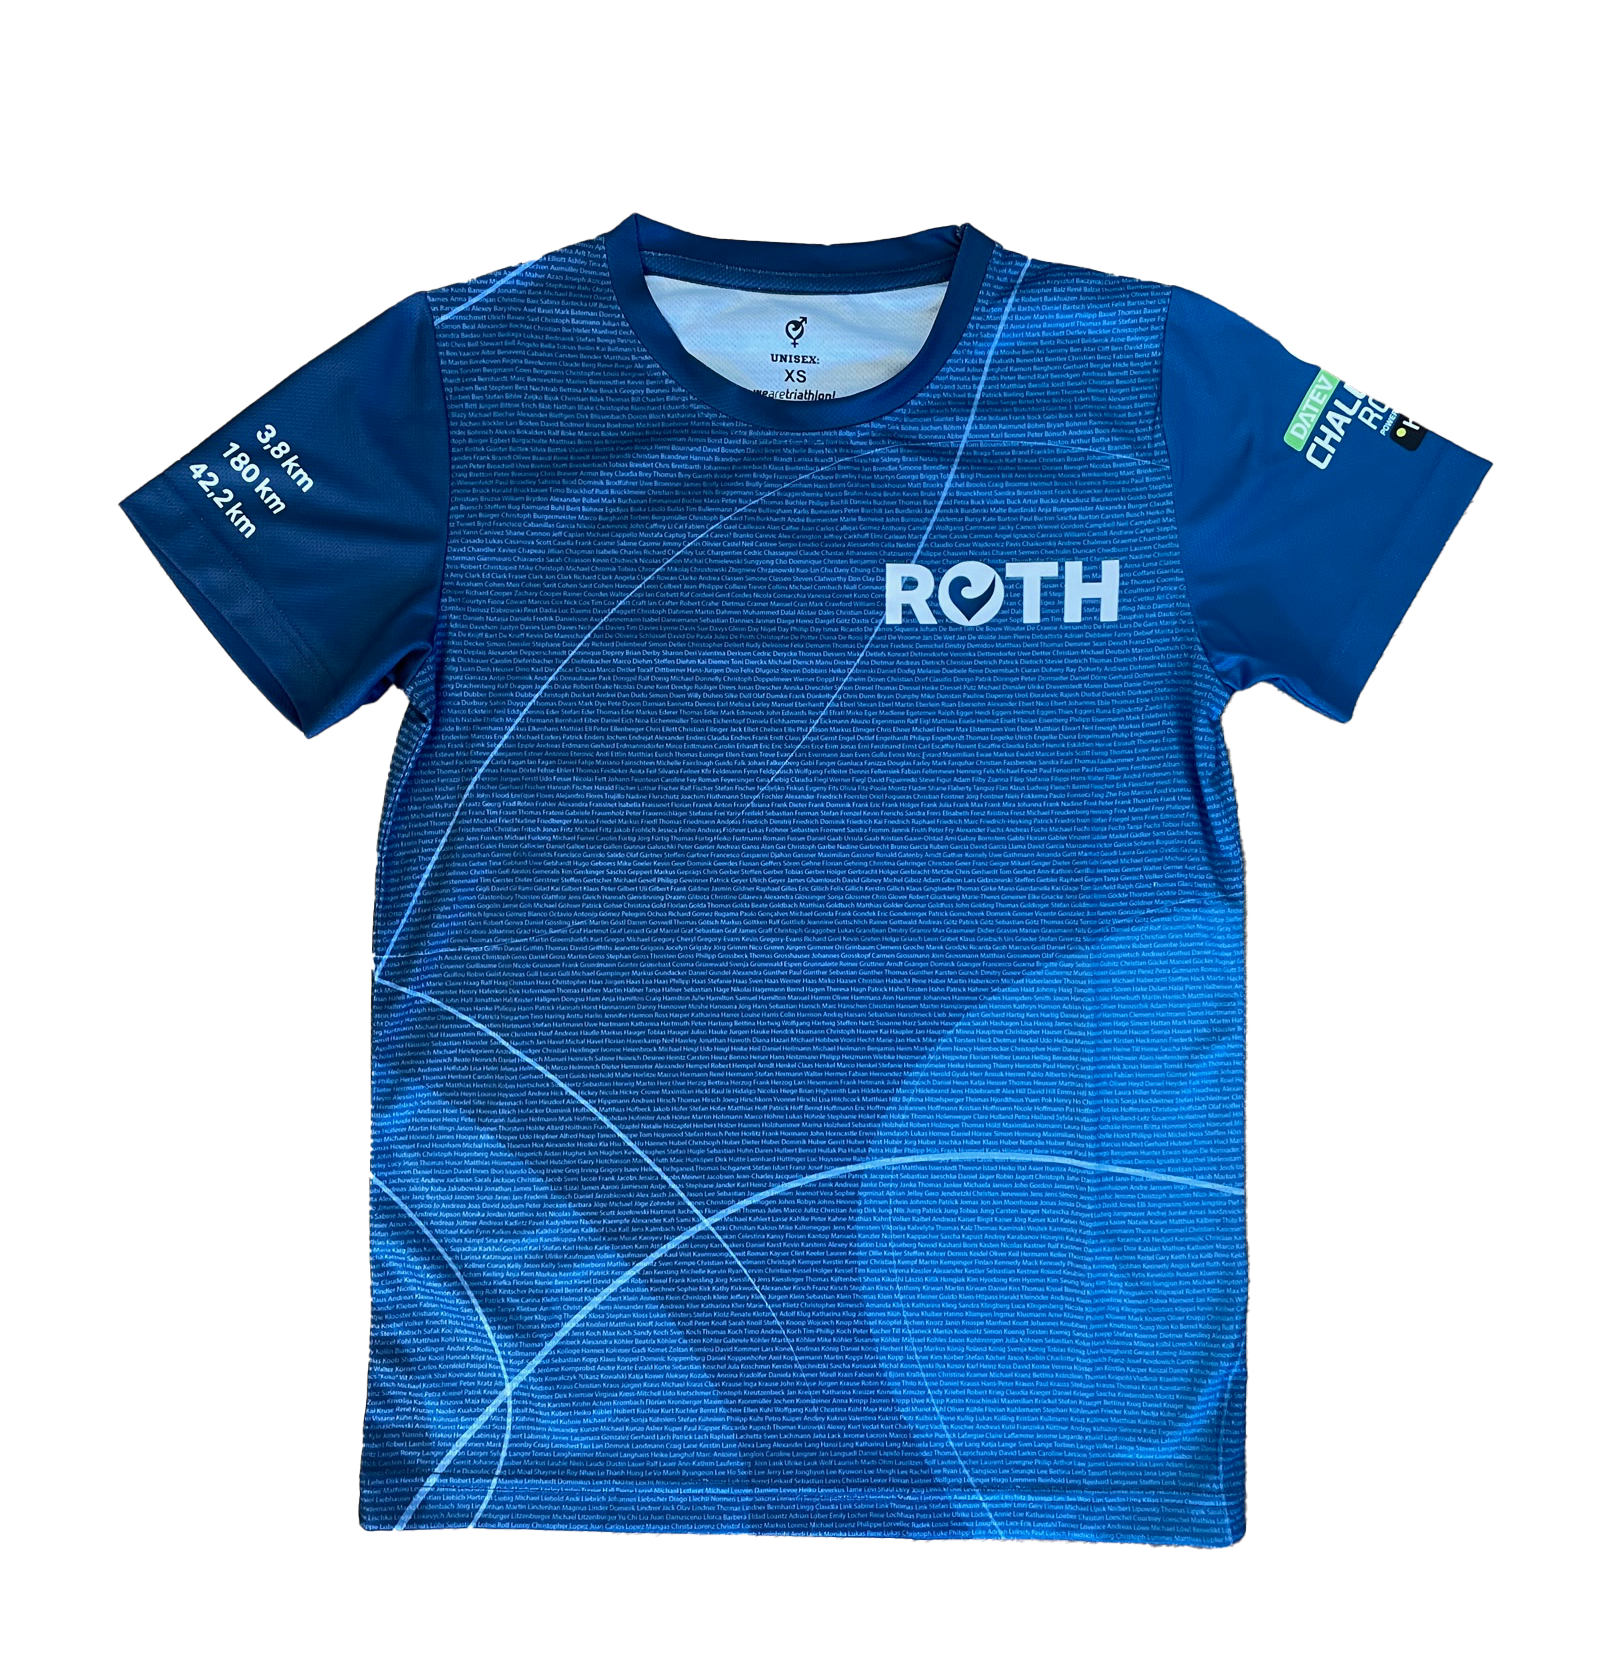 The official Challenge Roth Nameshirt 2023